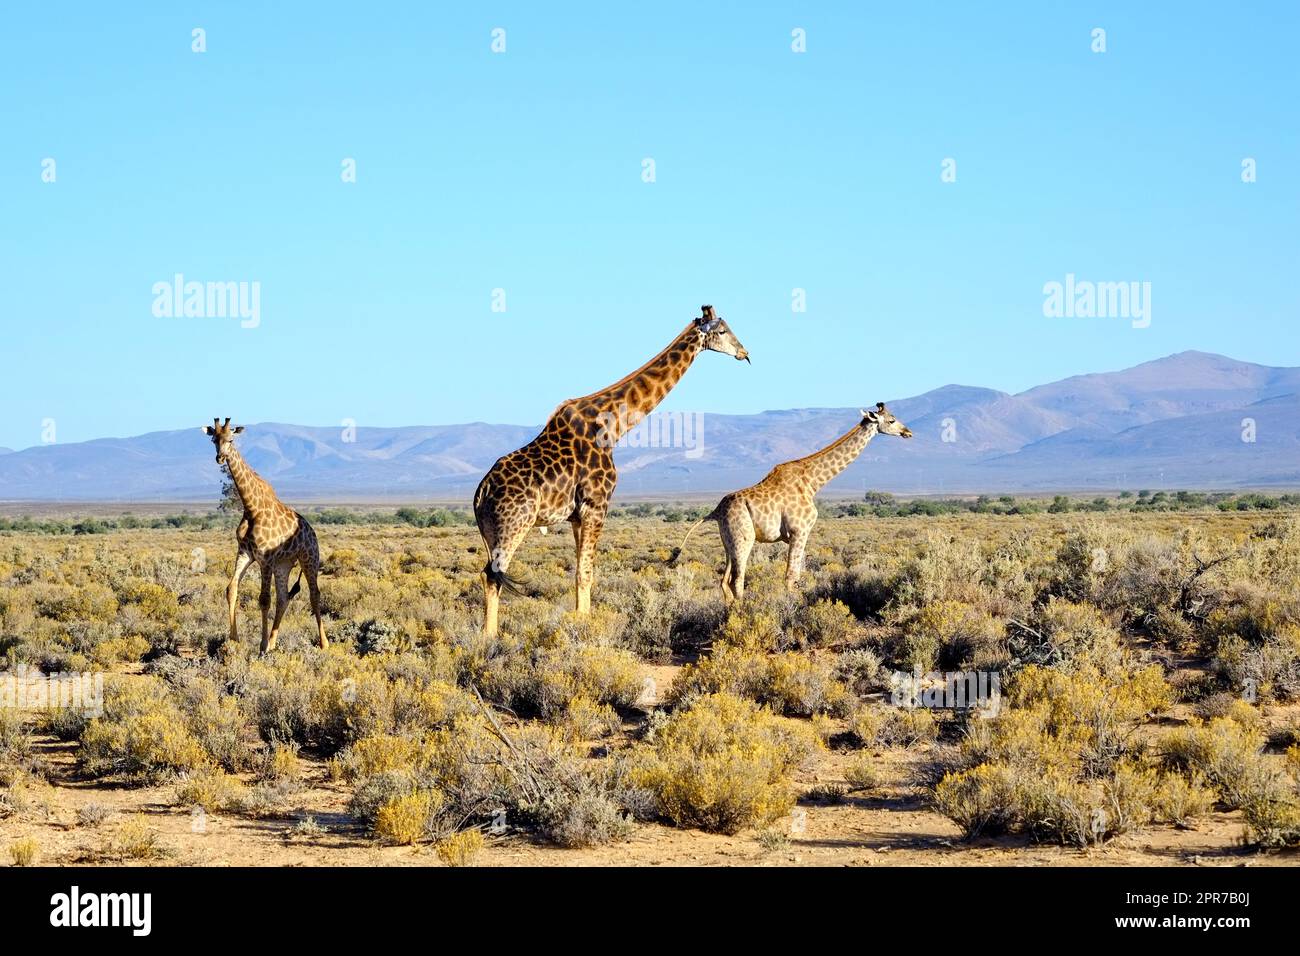 Tall giraffes in the savannah in South Africa. Wildlife conservation is important for all animals living in the wild. Animals walking around a woodland in a safari against a clear, blue sky Stock Photo